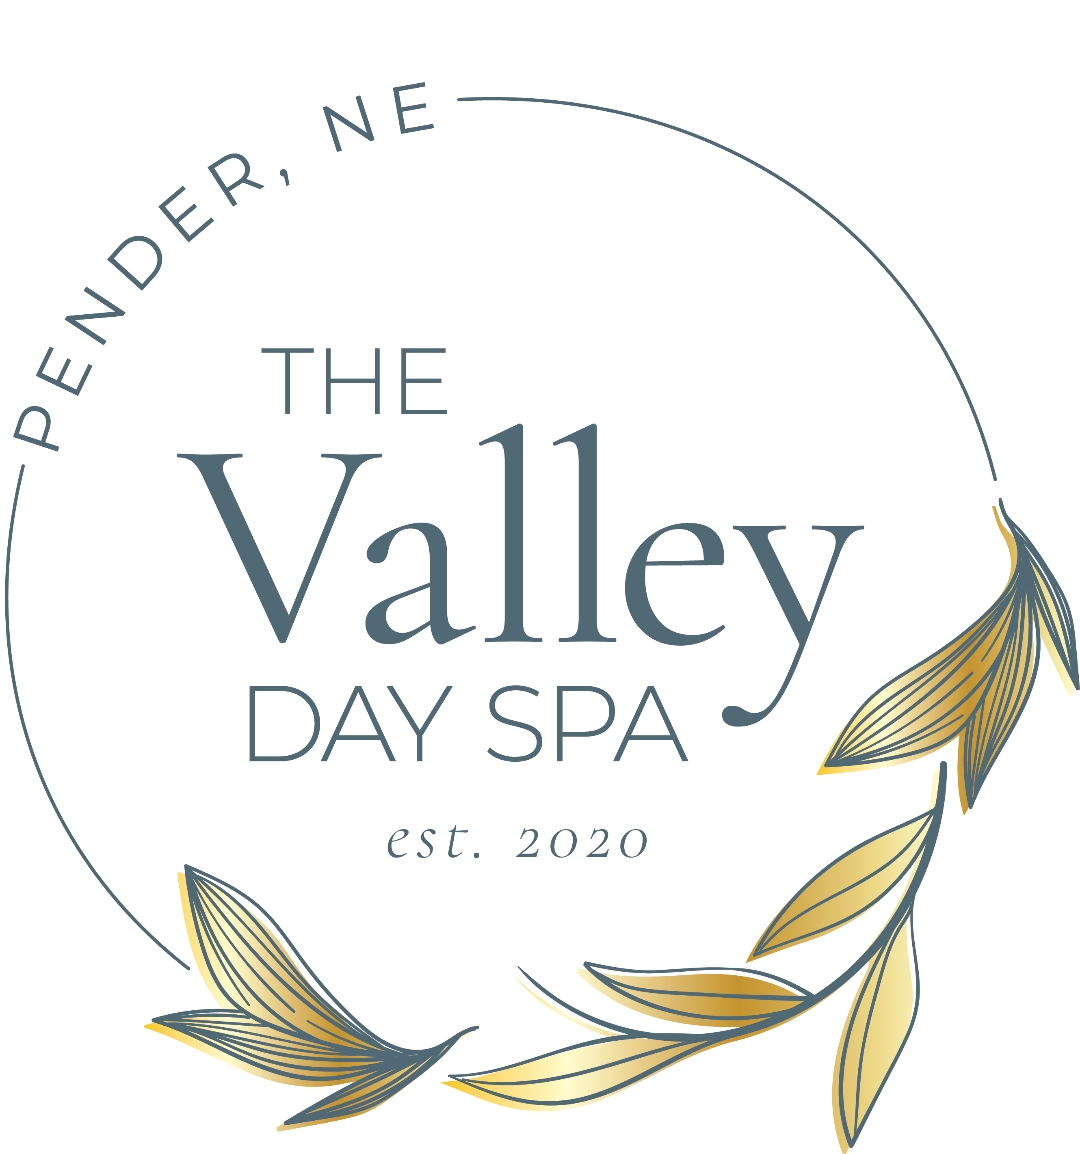 The Valley Day Spa